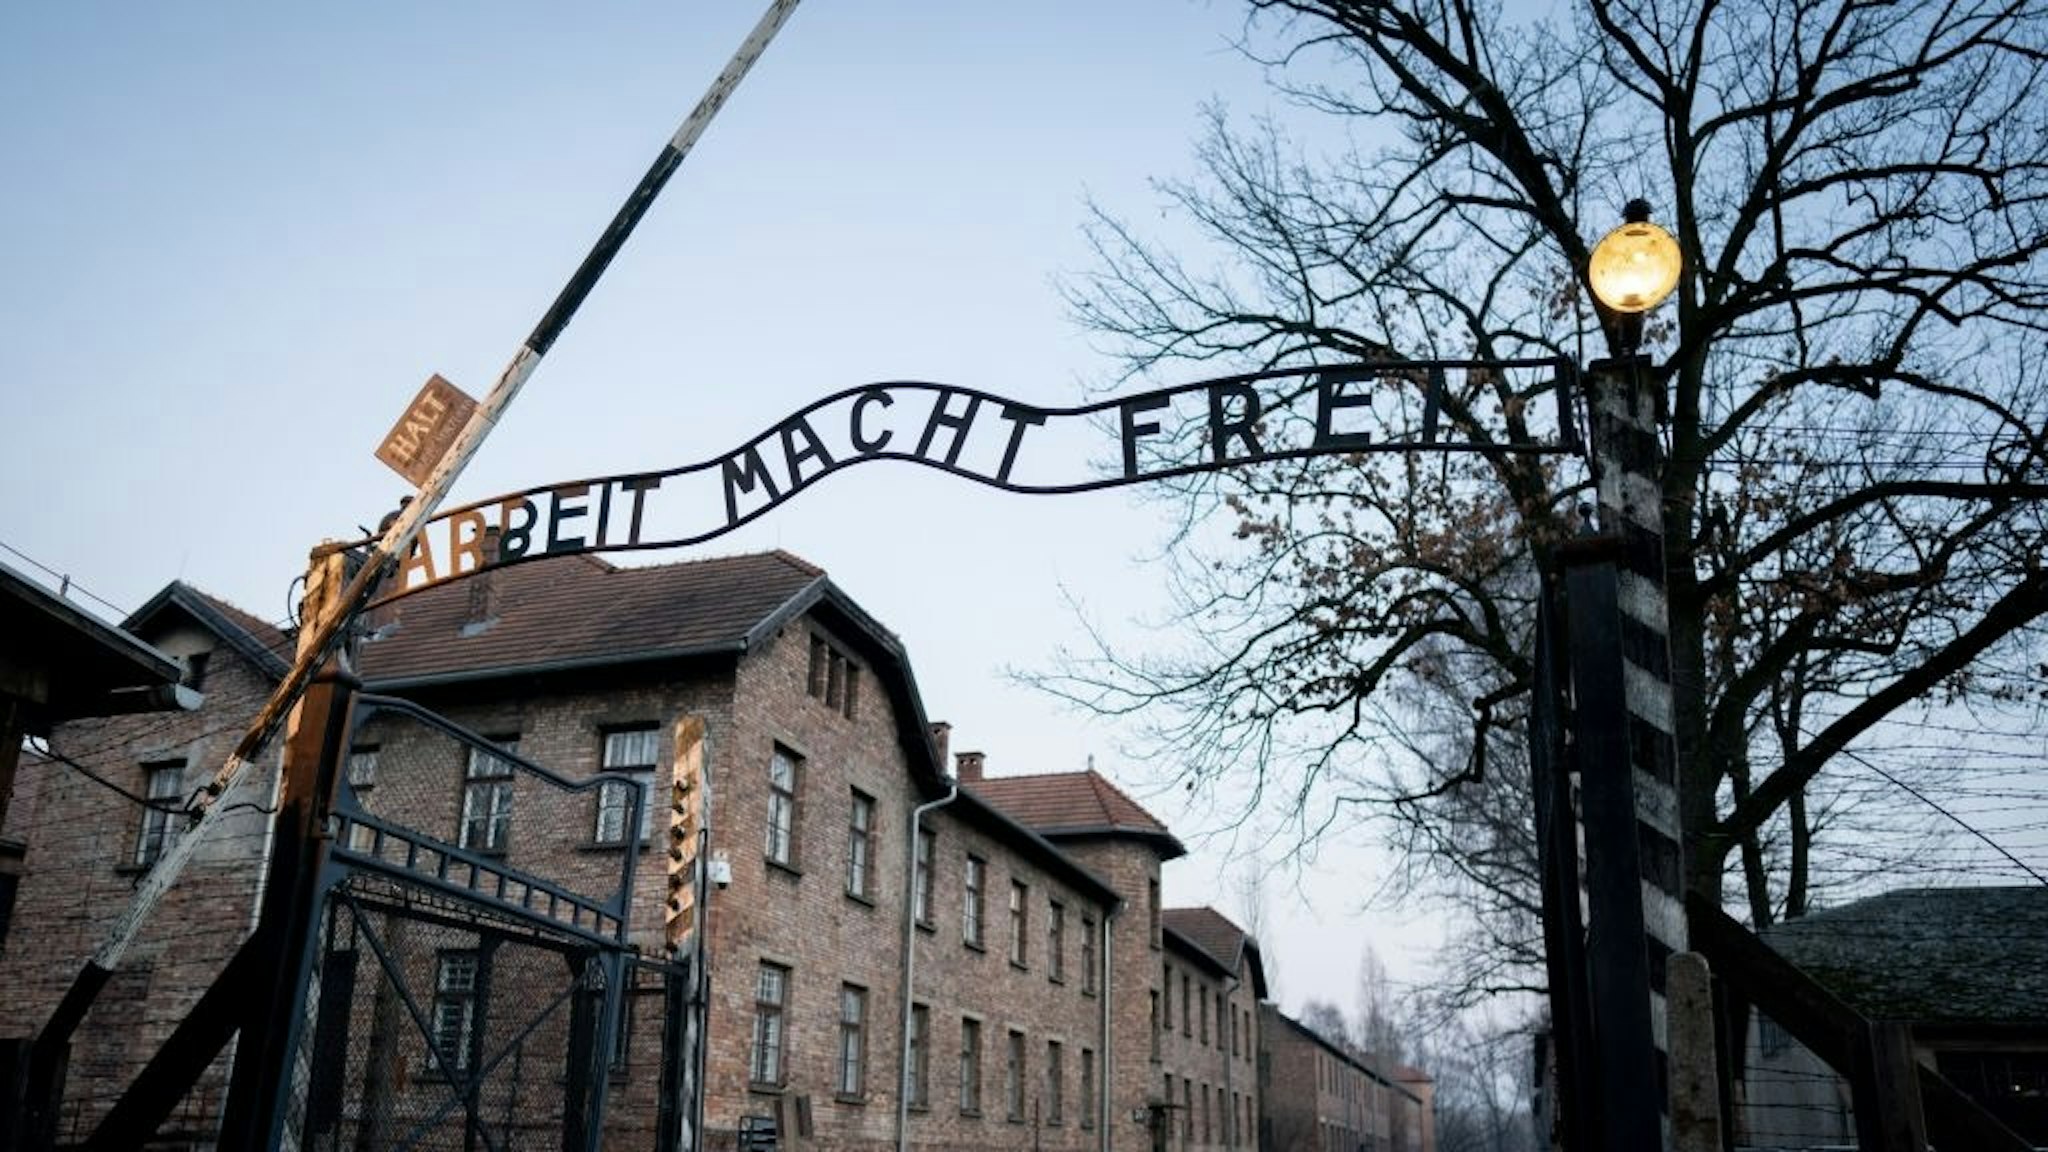 Auschwitz-Birkenau before the 75th anniversary of the liberation 24 January 2020, Poland, Oswiecim: The lettering "Arbeit macht frei" can be seen at the gate to the former concentration camp Auschwitz I. 27.01.2020 marks the 75th anniversary of the liberation of the concentration camp by the Red Army. From 1940 to 1945, the SS operated the complex with numerous satellite camps as concentration and extermination camps. The number of those murdered amounts to 1.1 to 1.5 million, most of them Jews. Auschwitz stands as a symbol of industrial mass murder and the extermination of the Jews. Photo: Kay Nietfeld/dpa (Photo by Kay Nietfeld/picture alliance via Getty Images) picture alliance / Contributor